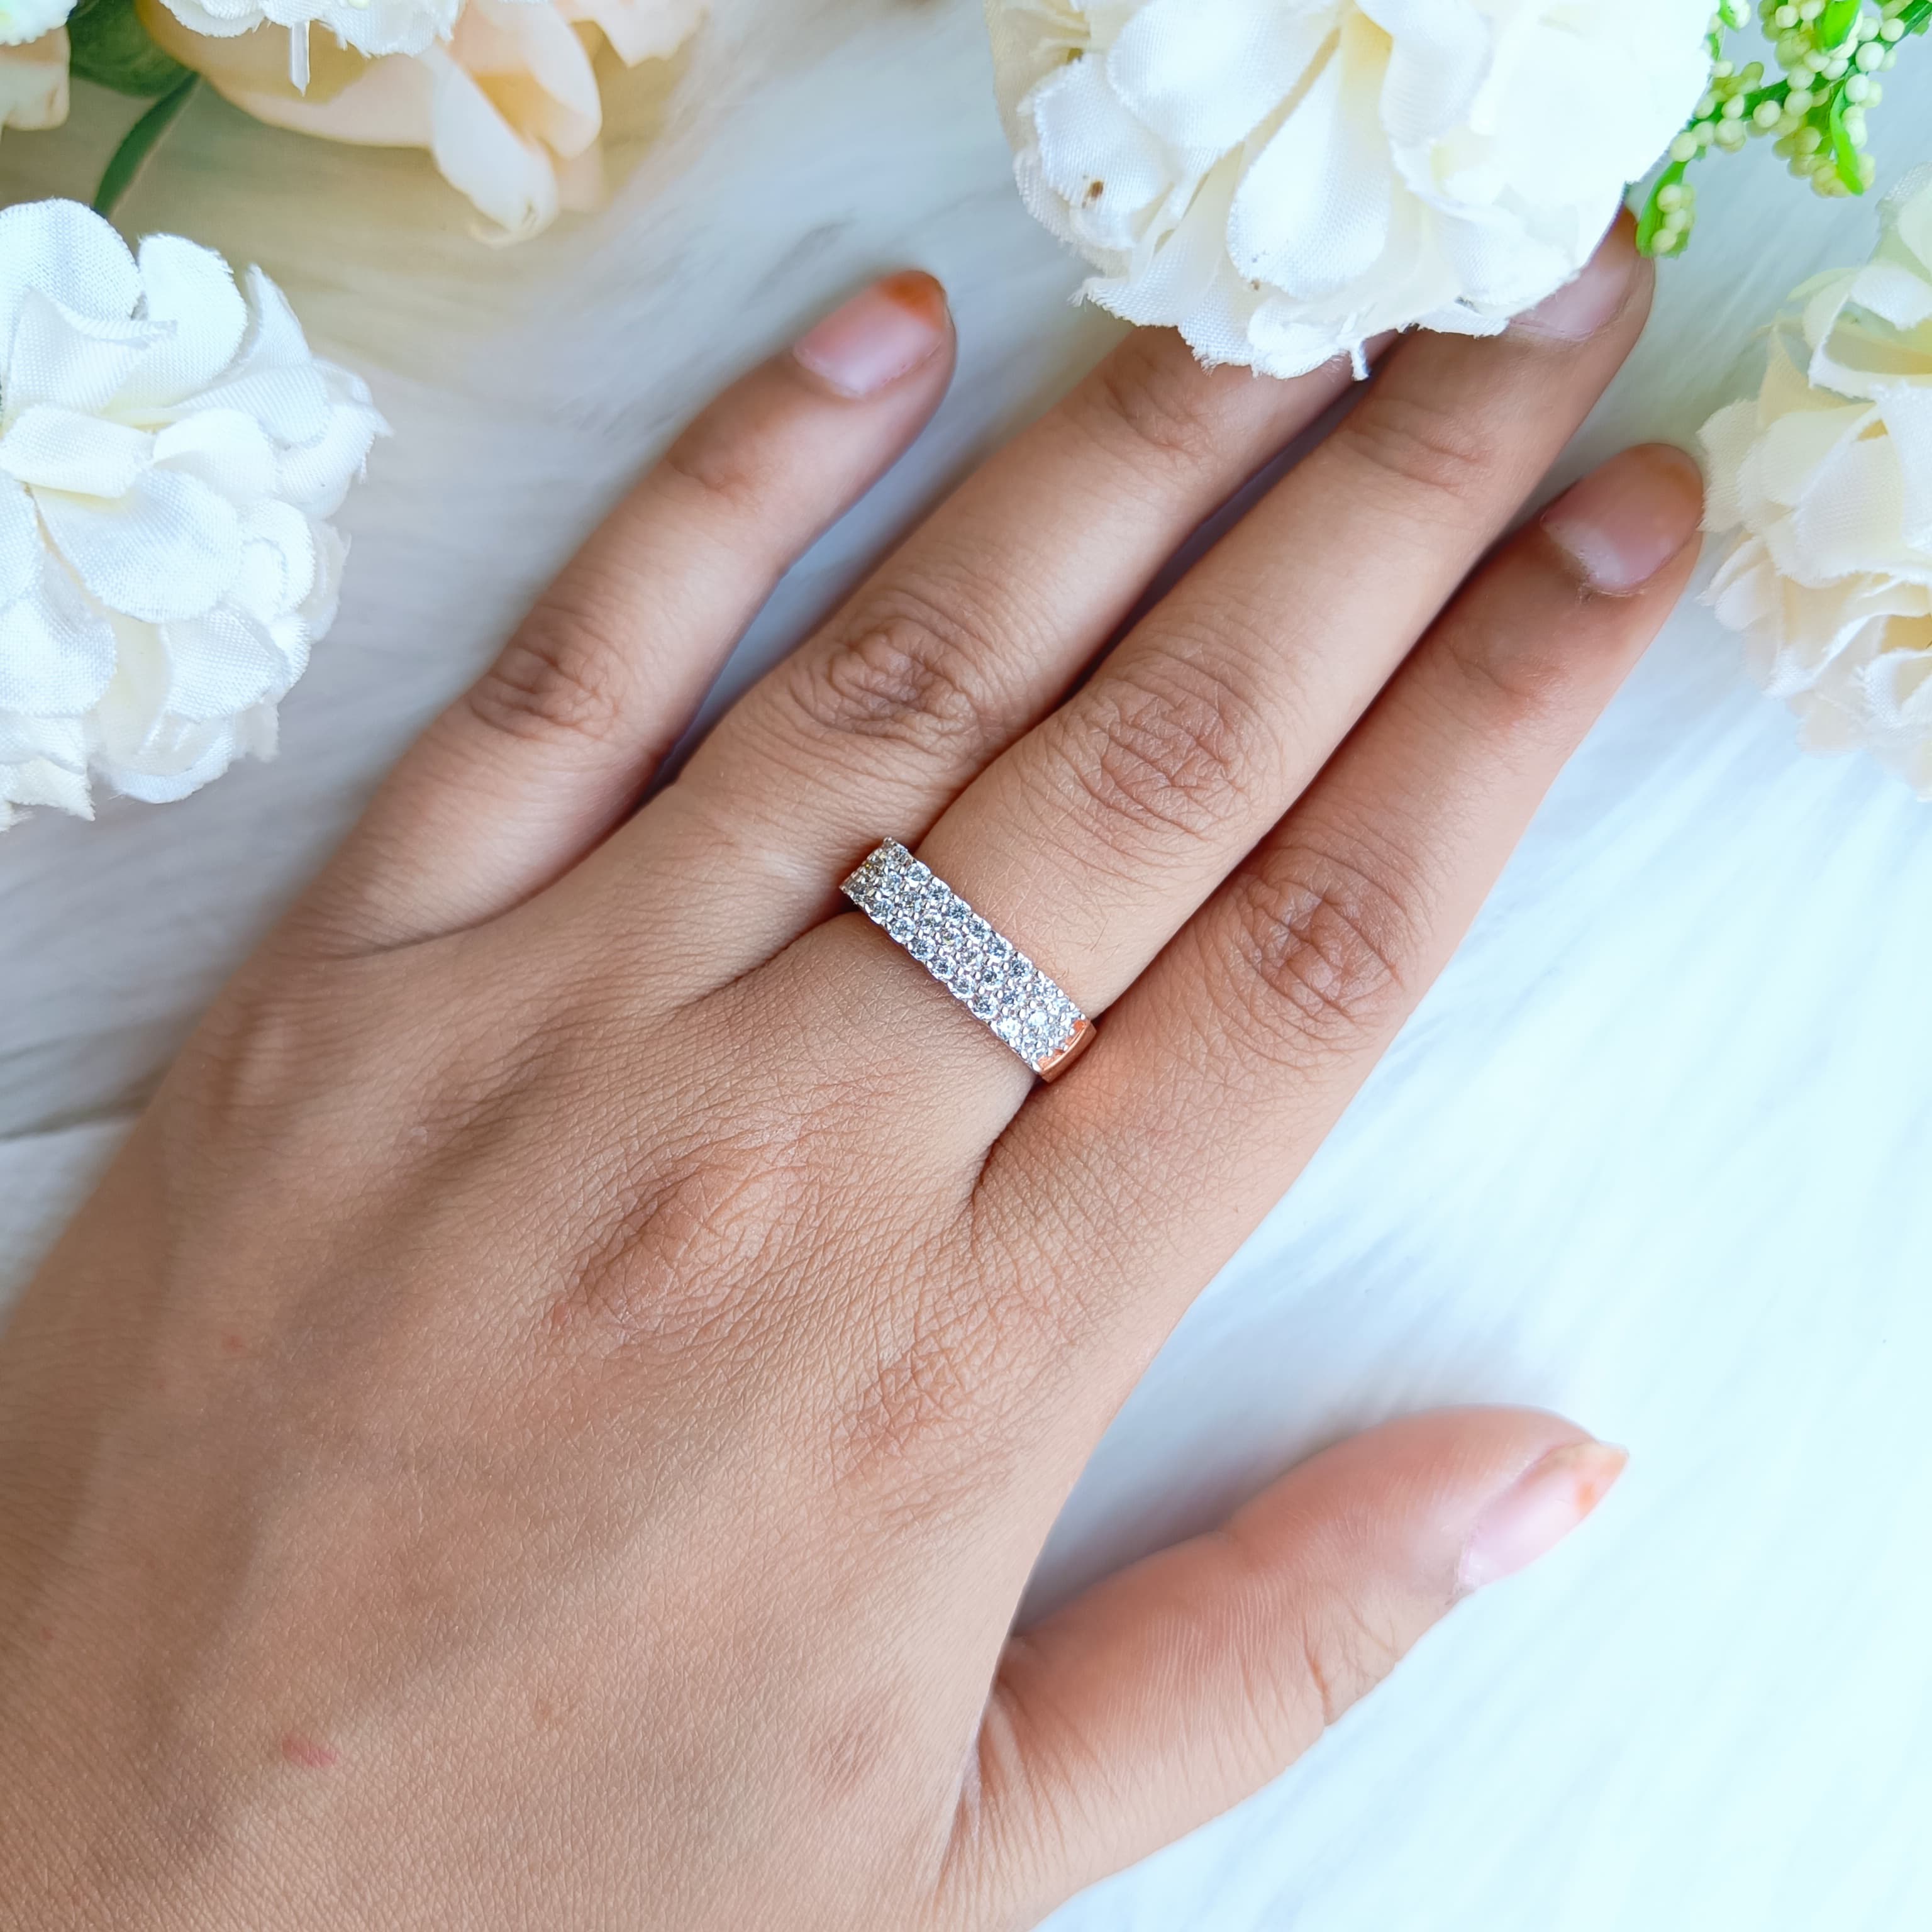 Vs sterling silver Cocktail Ring-161